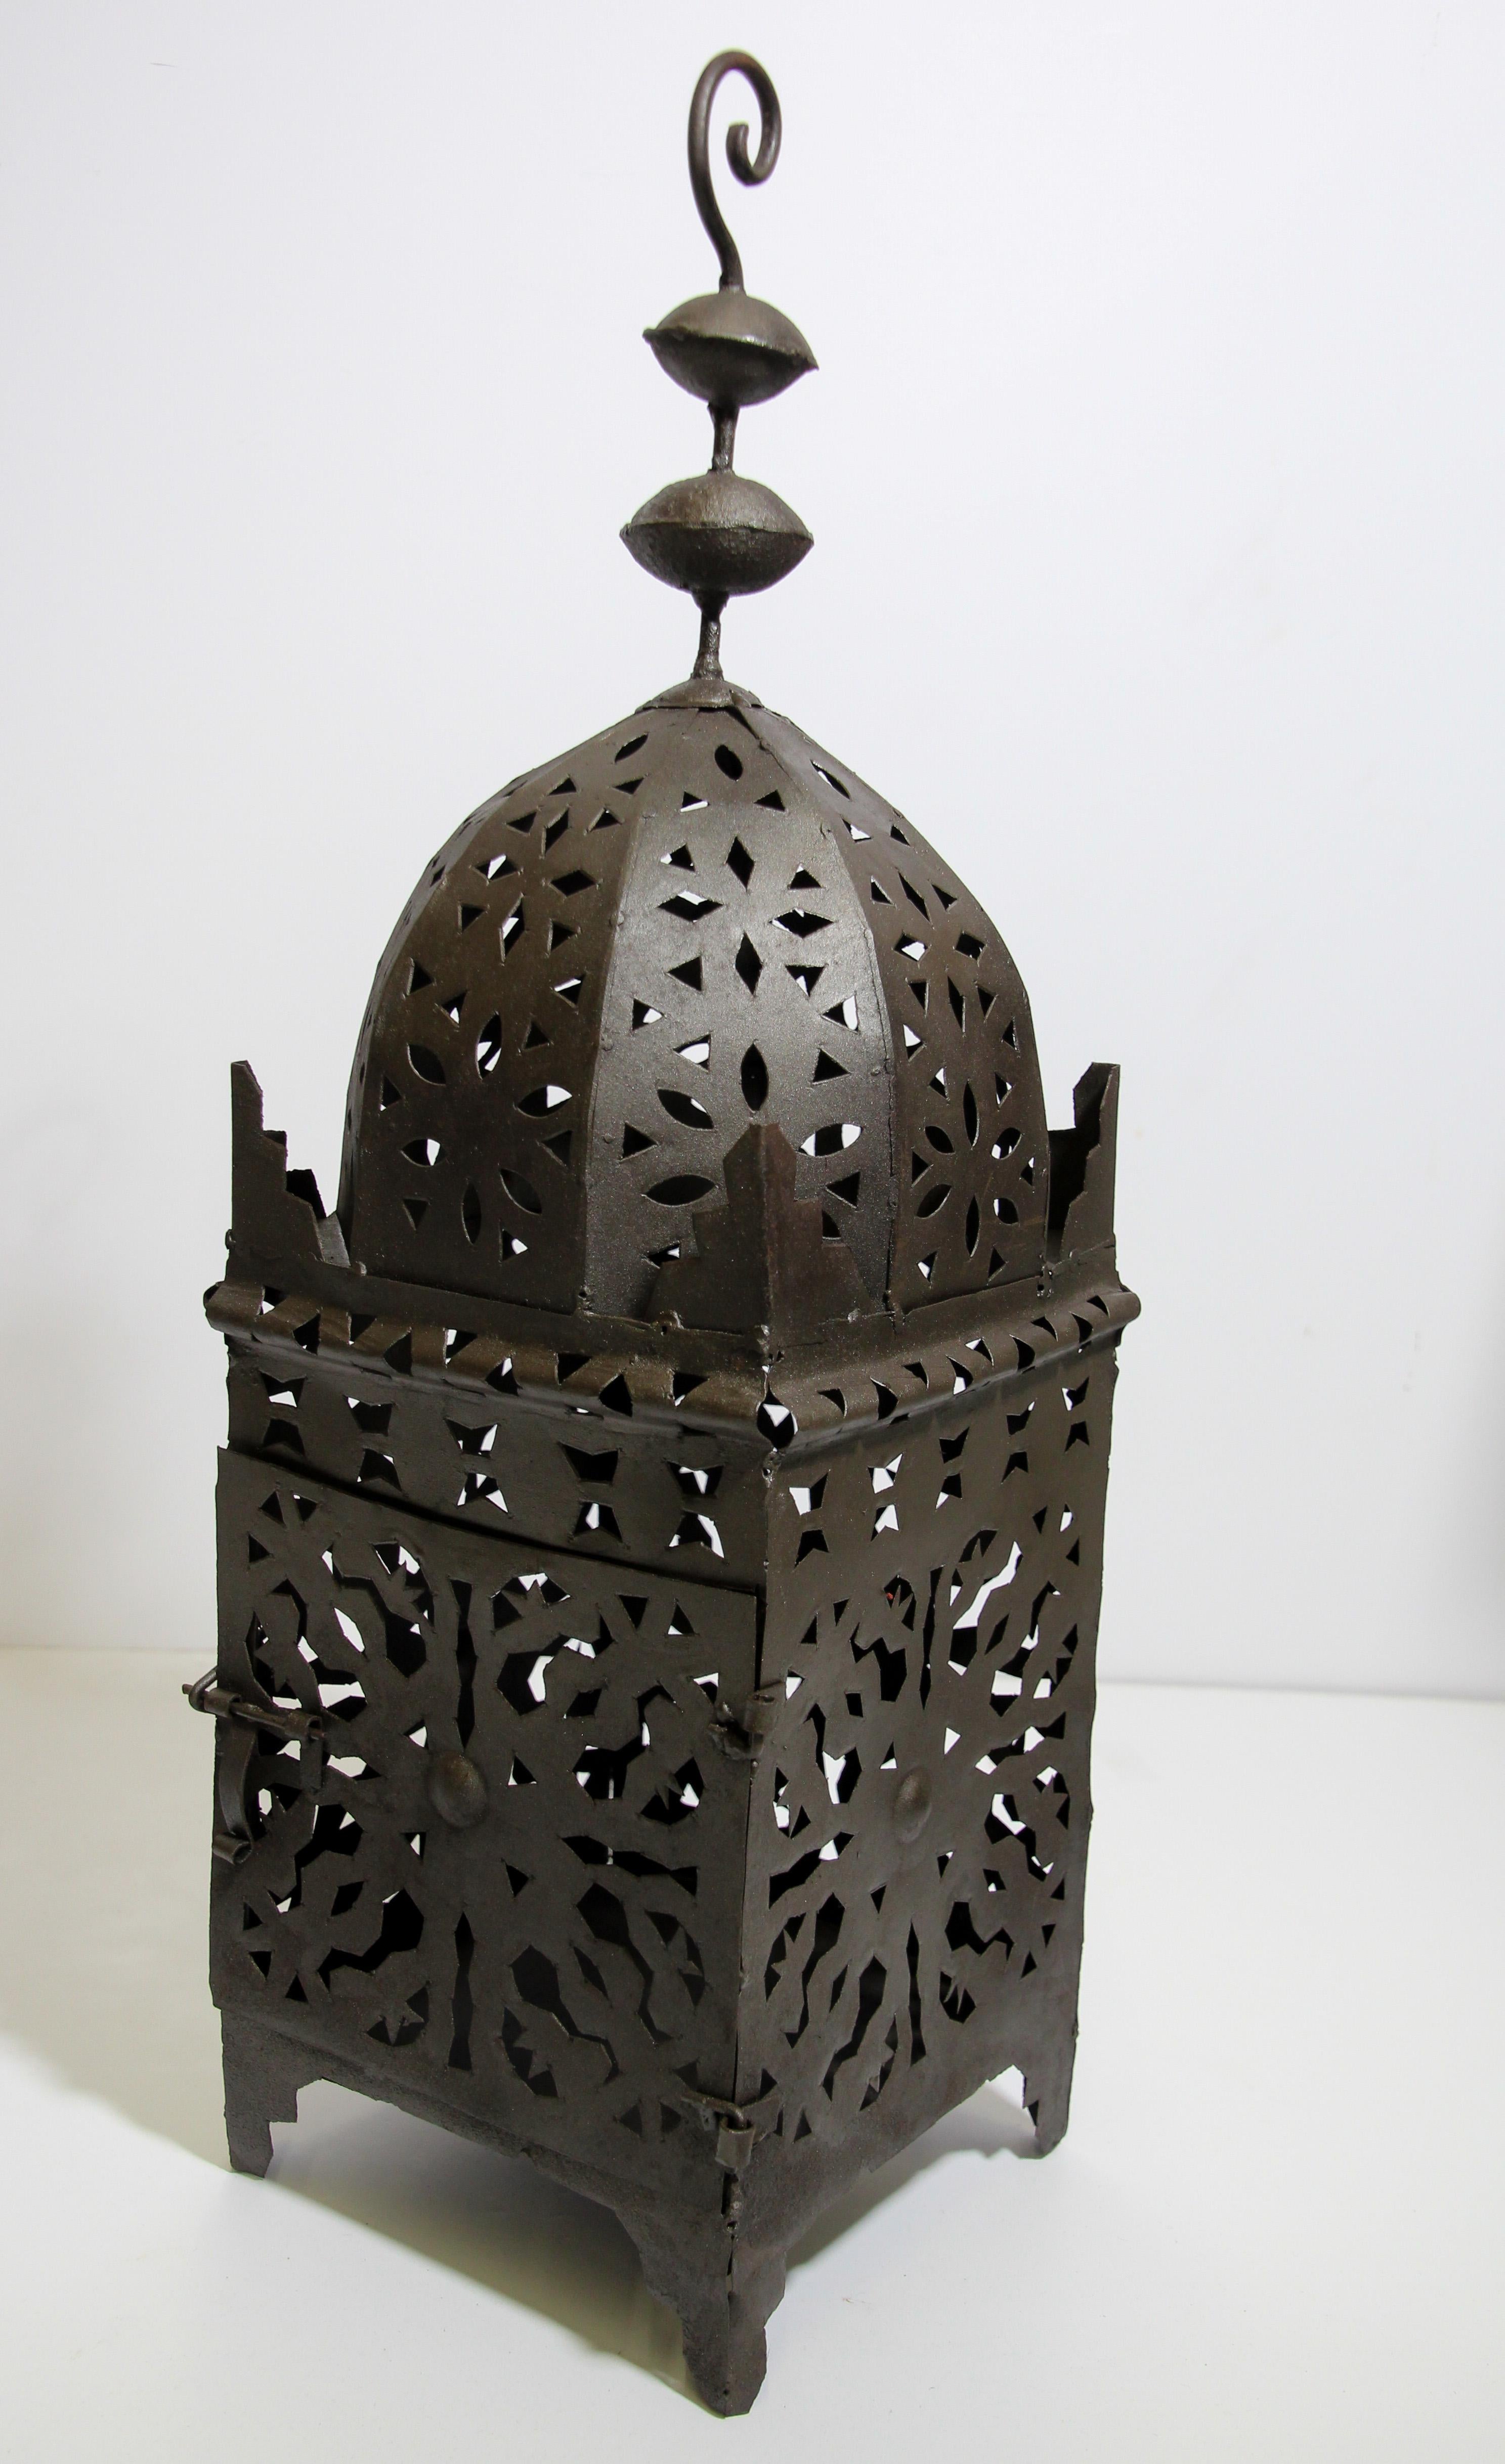 Large Moroccan Moorish metal candle lantern.
Incredible rough cut metal form, vaguely Spanish revival Moorish in outline but with a brutalist edge, reminiscent of the work of Felipe Derflinger.
Hurricane candle lamp handcrafted in Morocco by